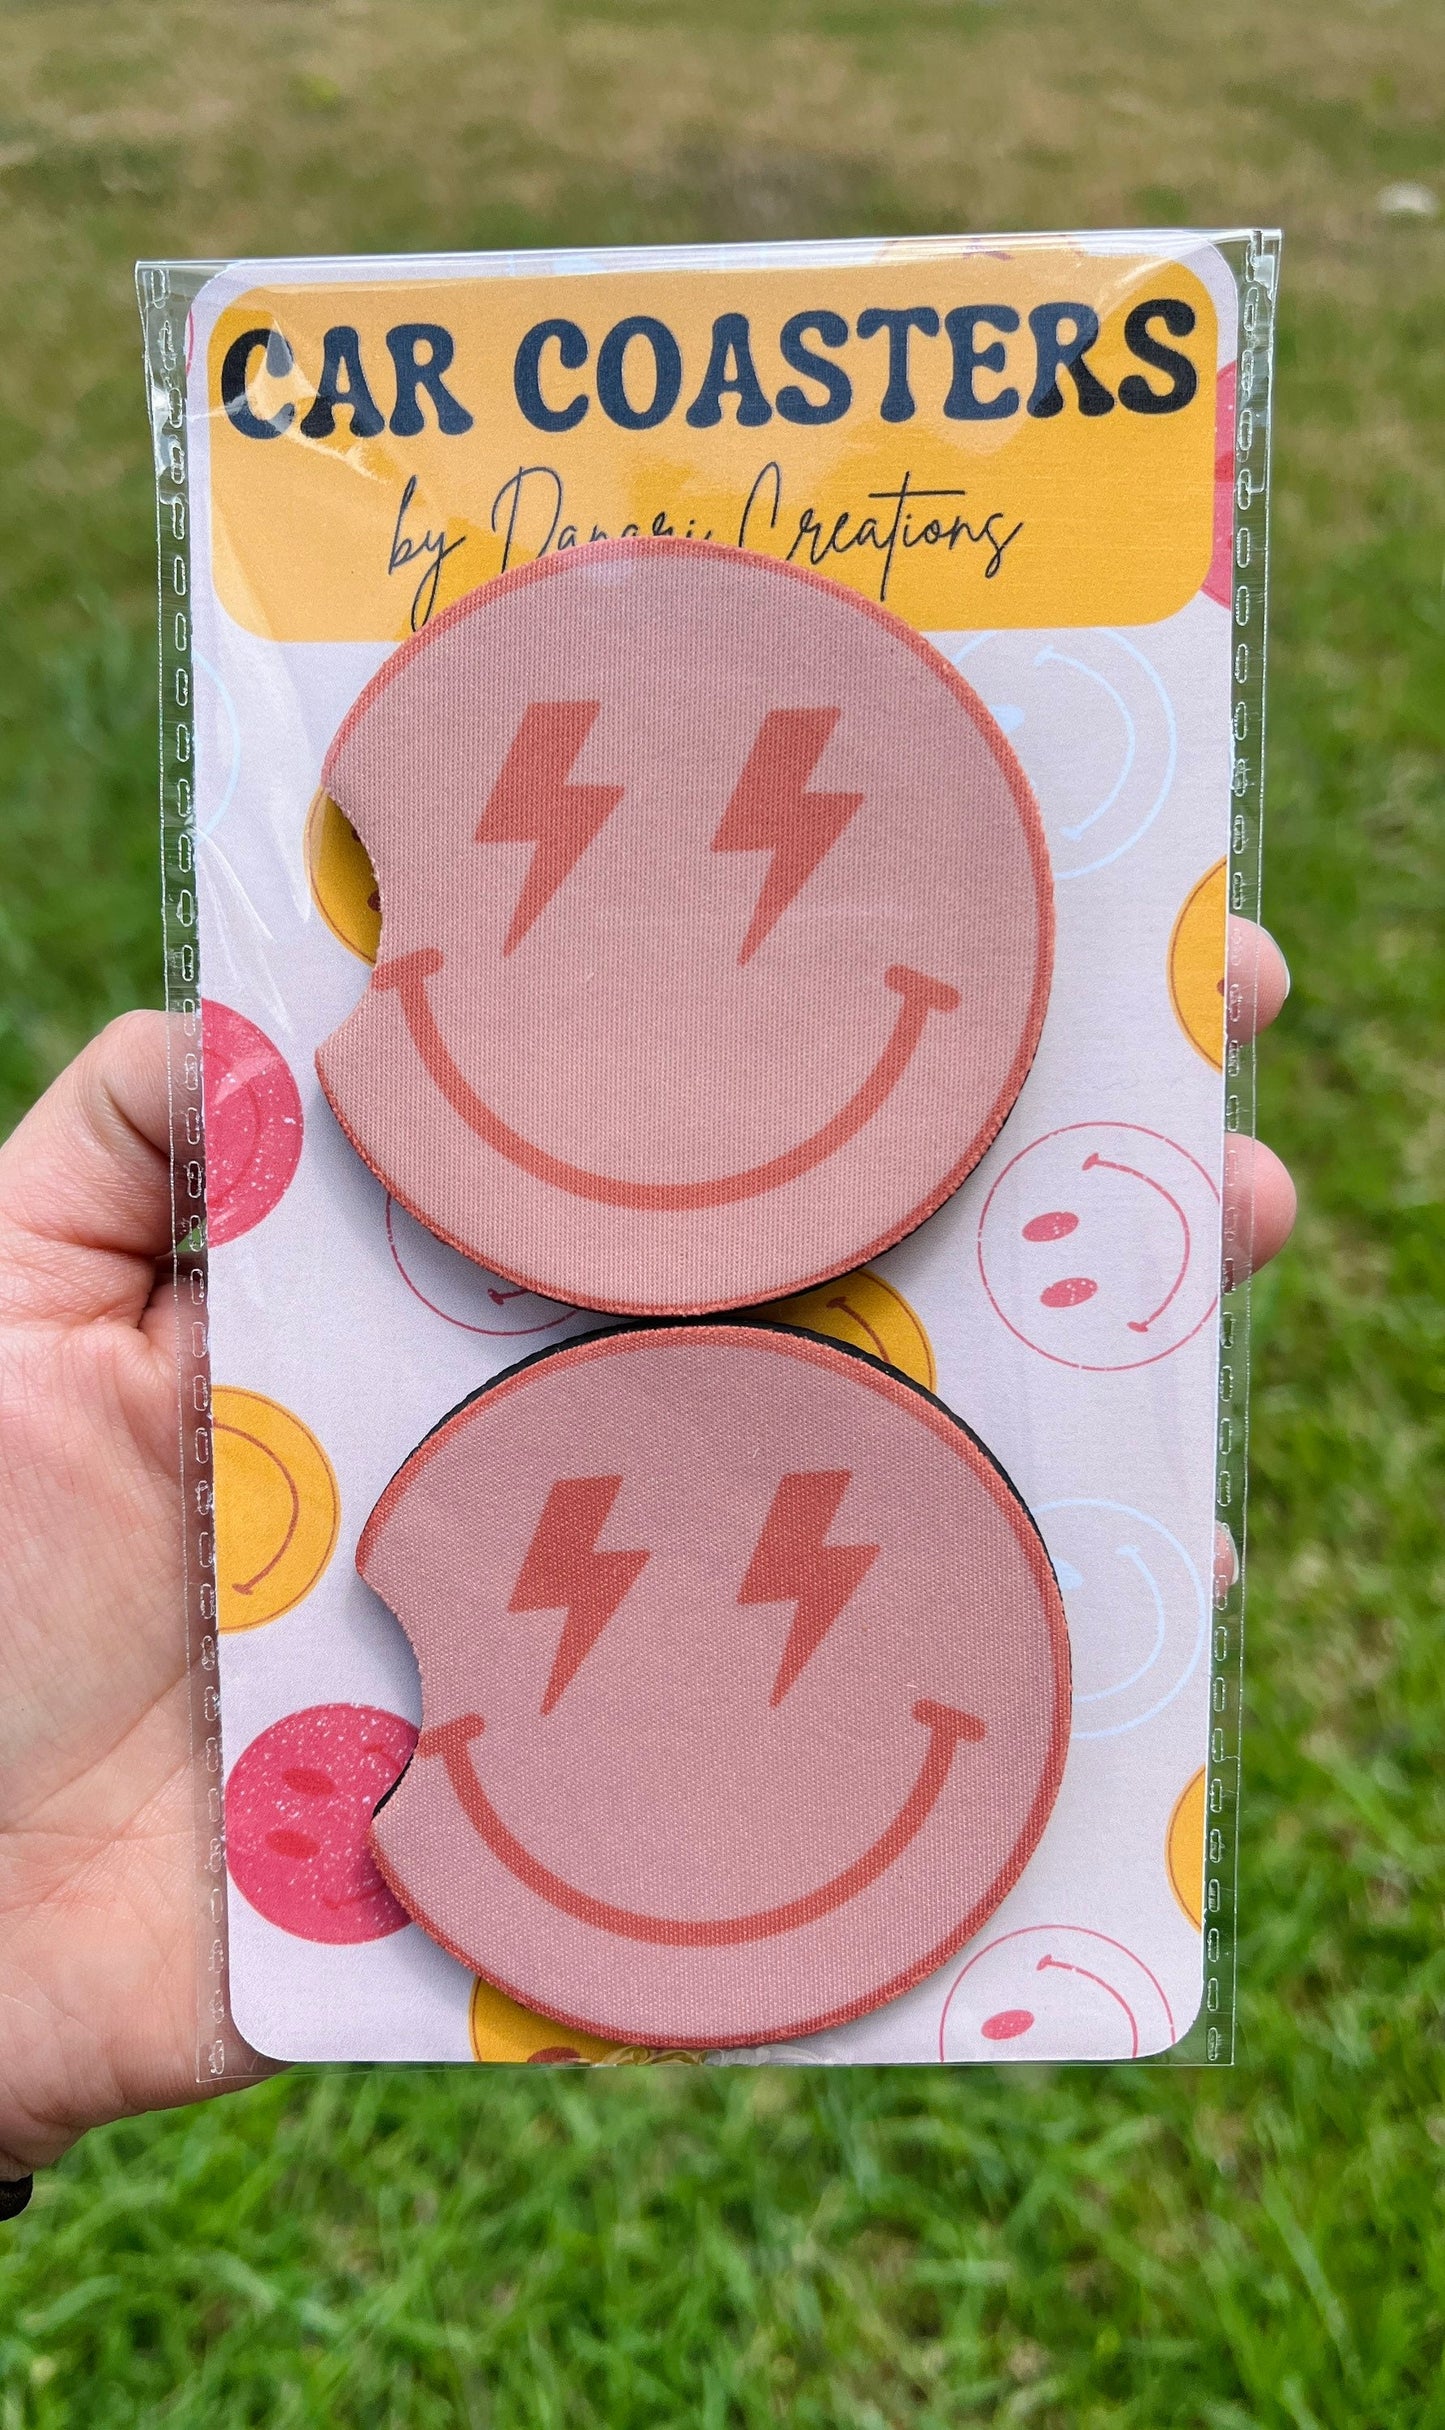 Smile Face Car Coasters Set of 2, Peach Color Lightning Bolt Eyes Car Coasters, Car Gift, Birthday Gift for Women, Cup Holder Coasters